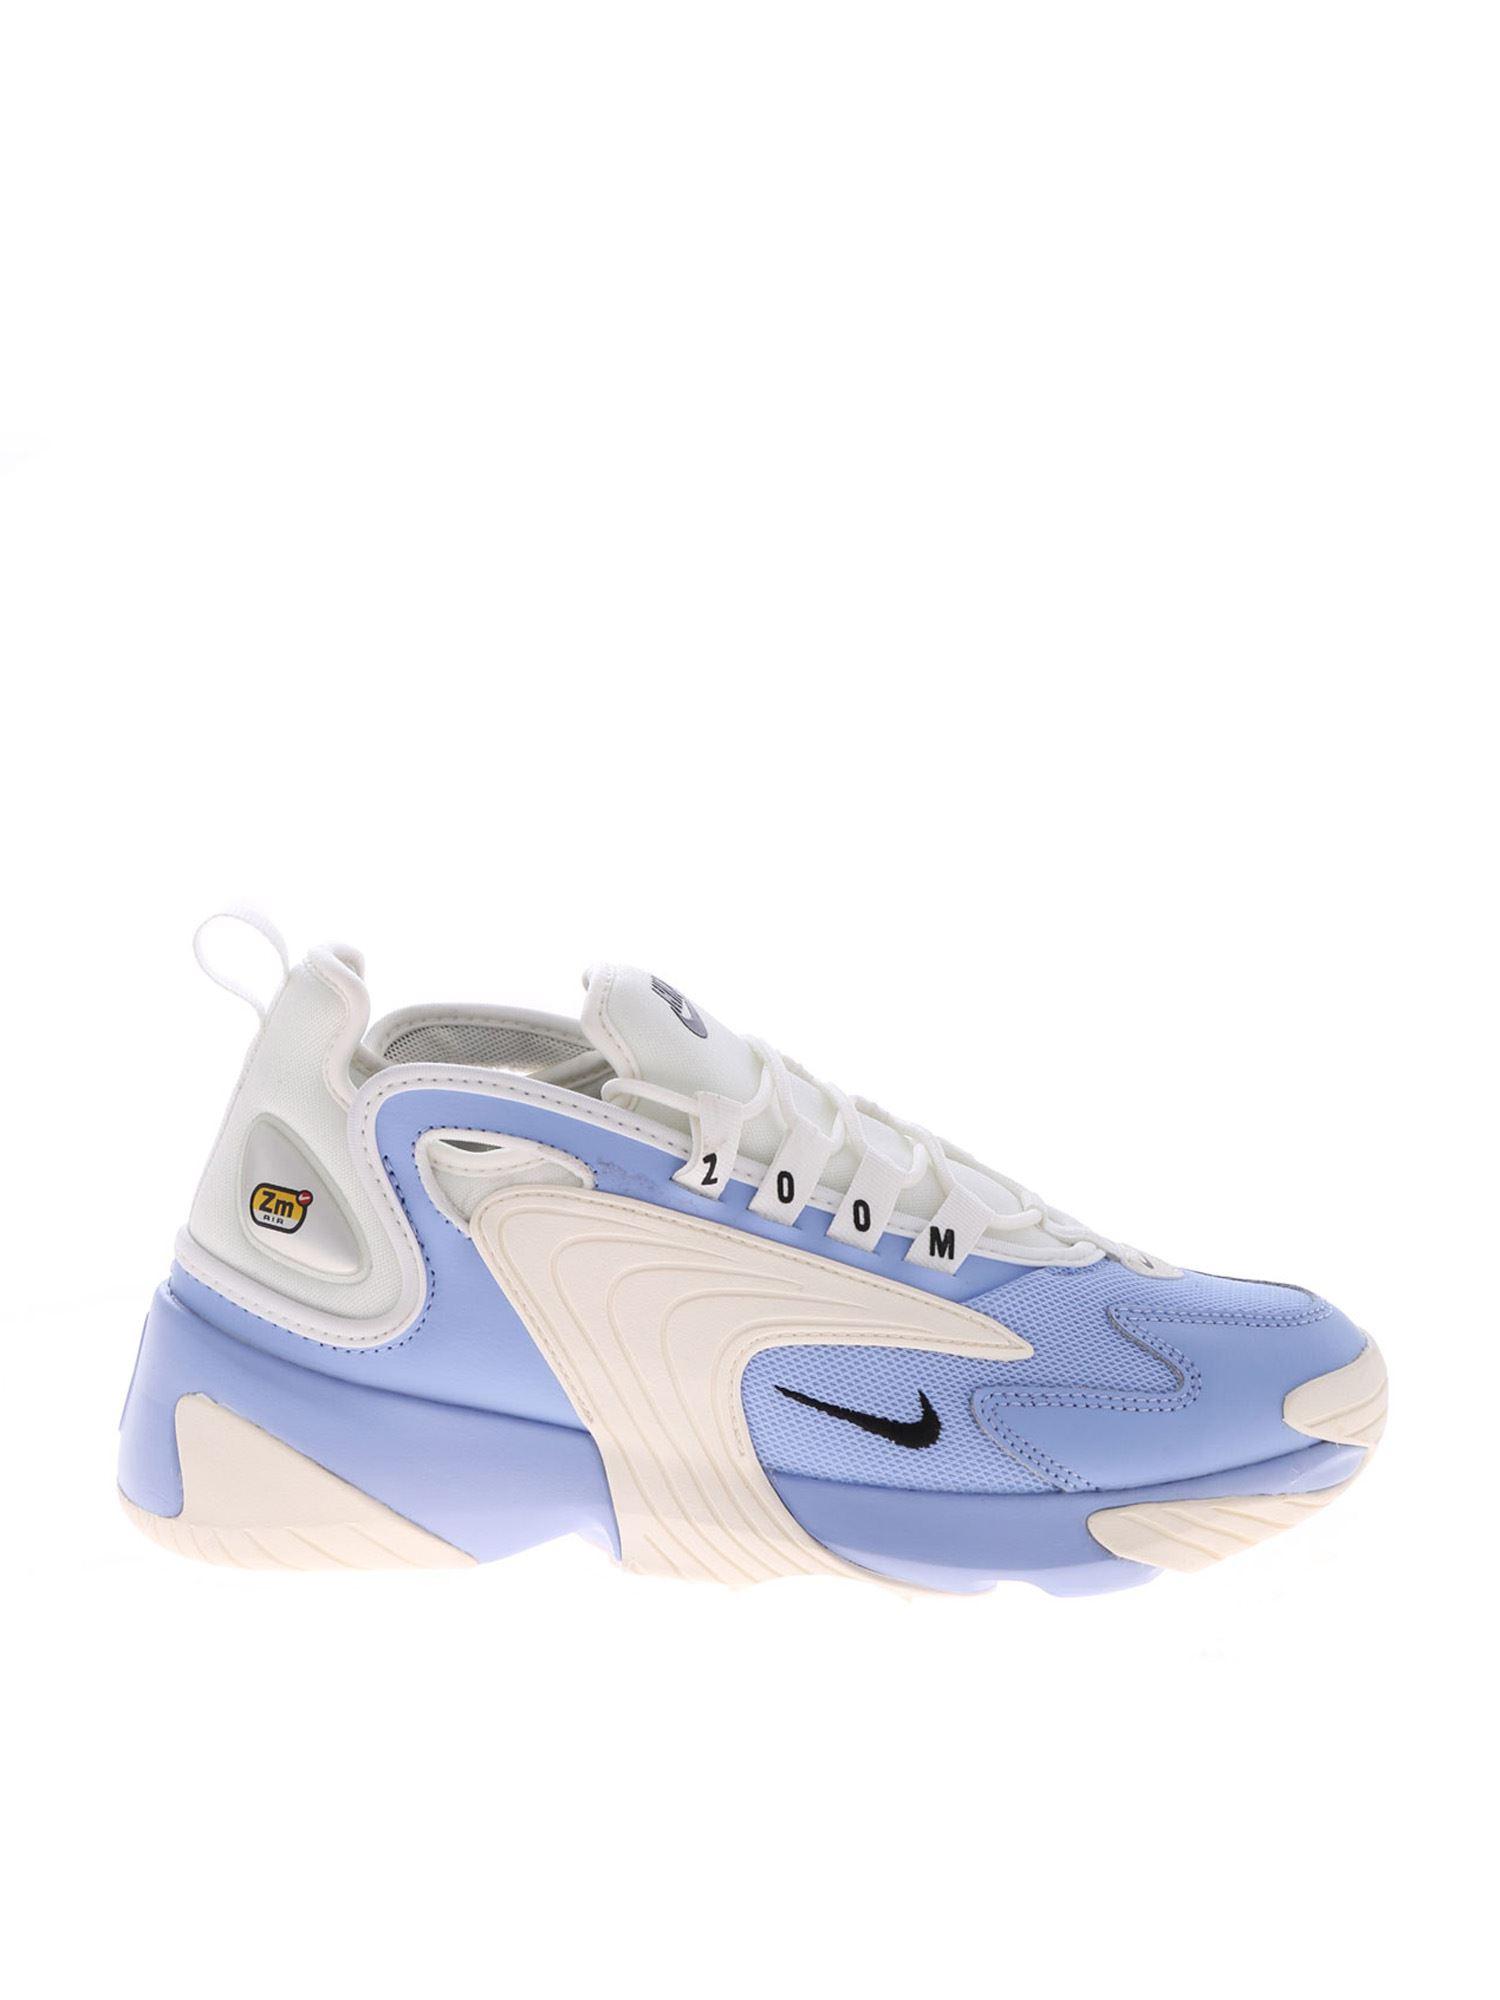 white and light blue nikes